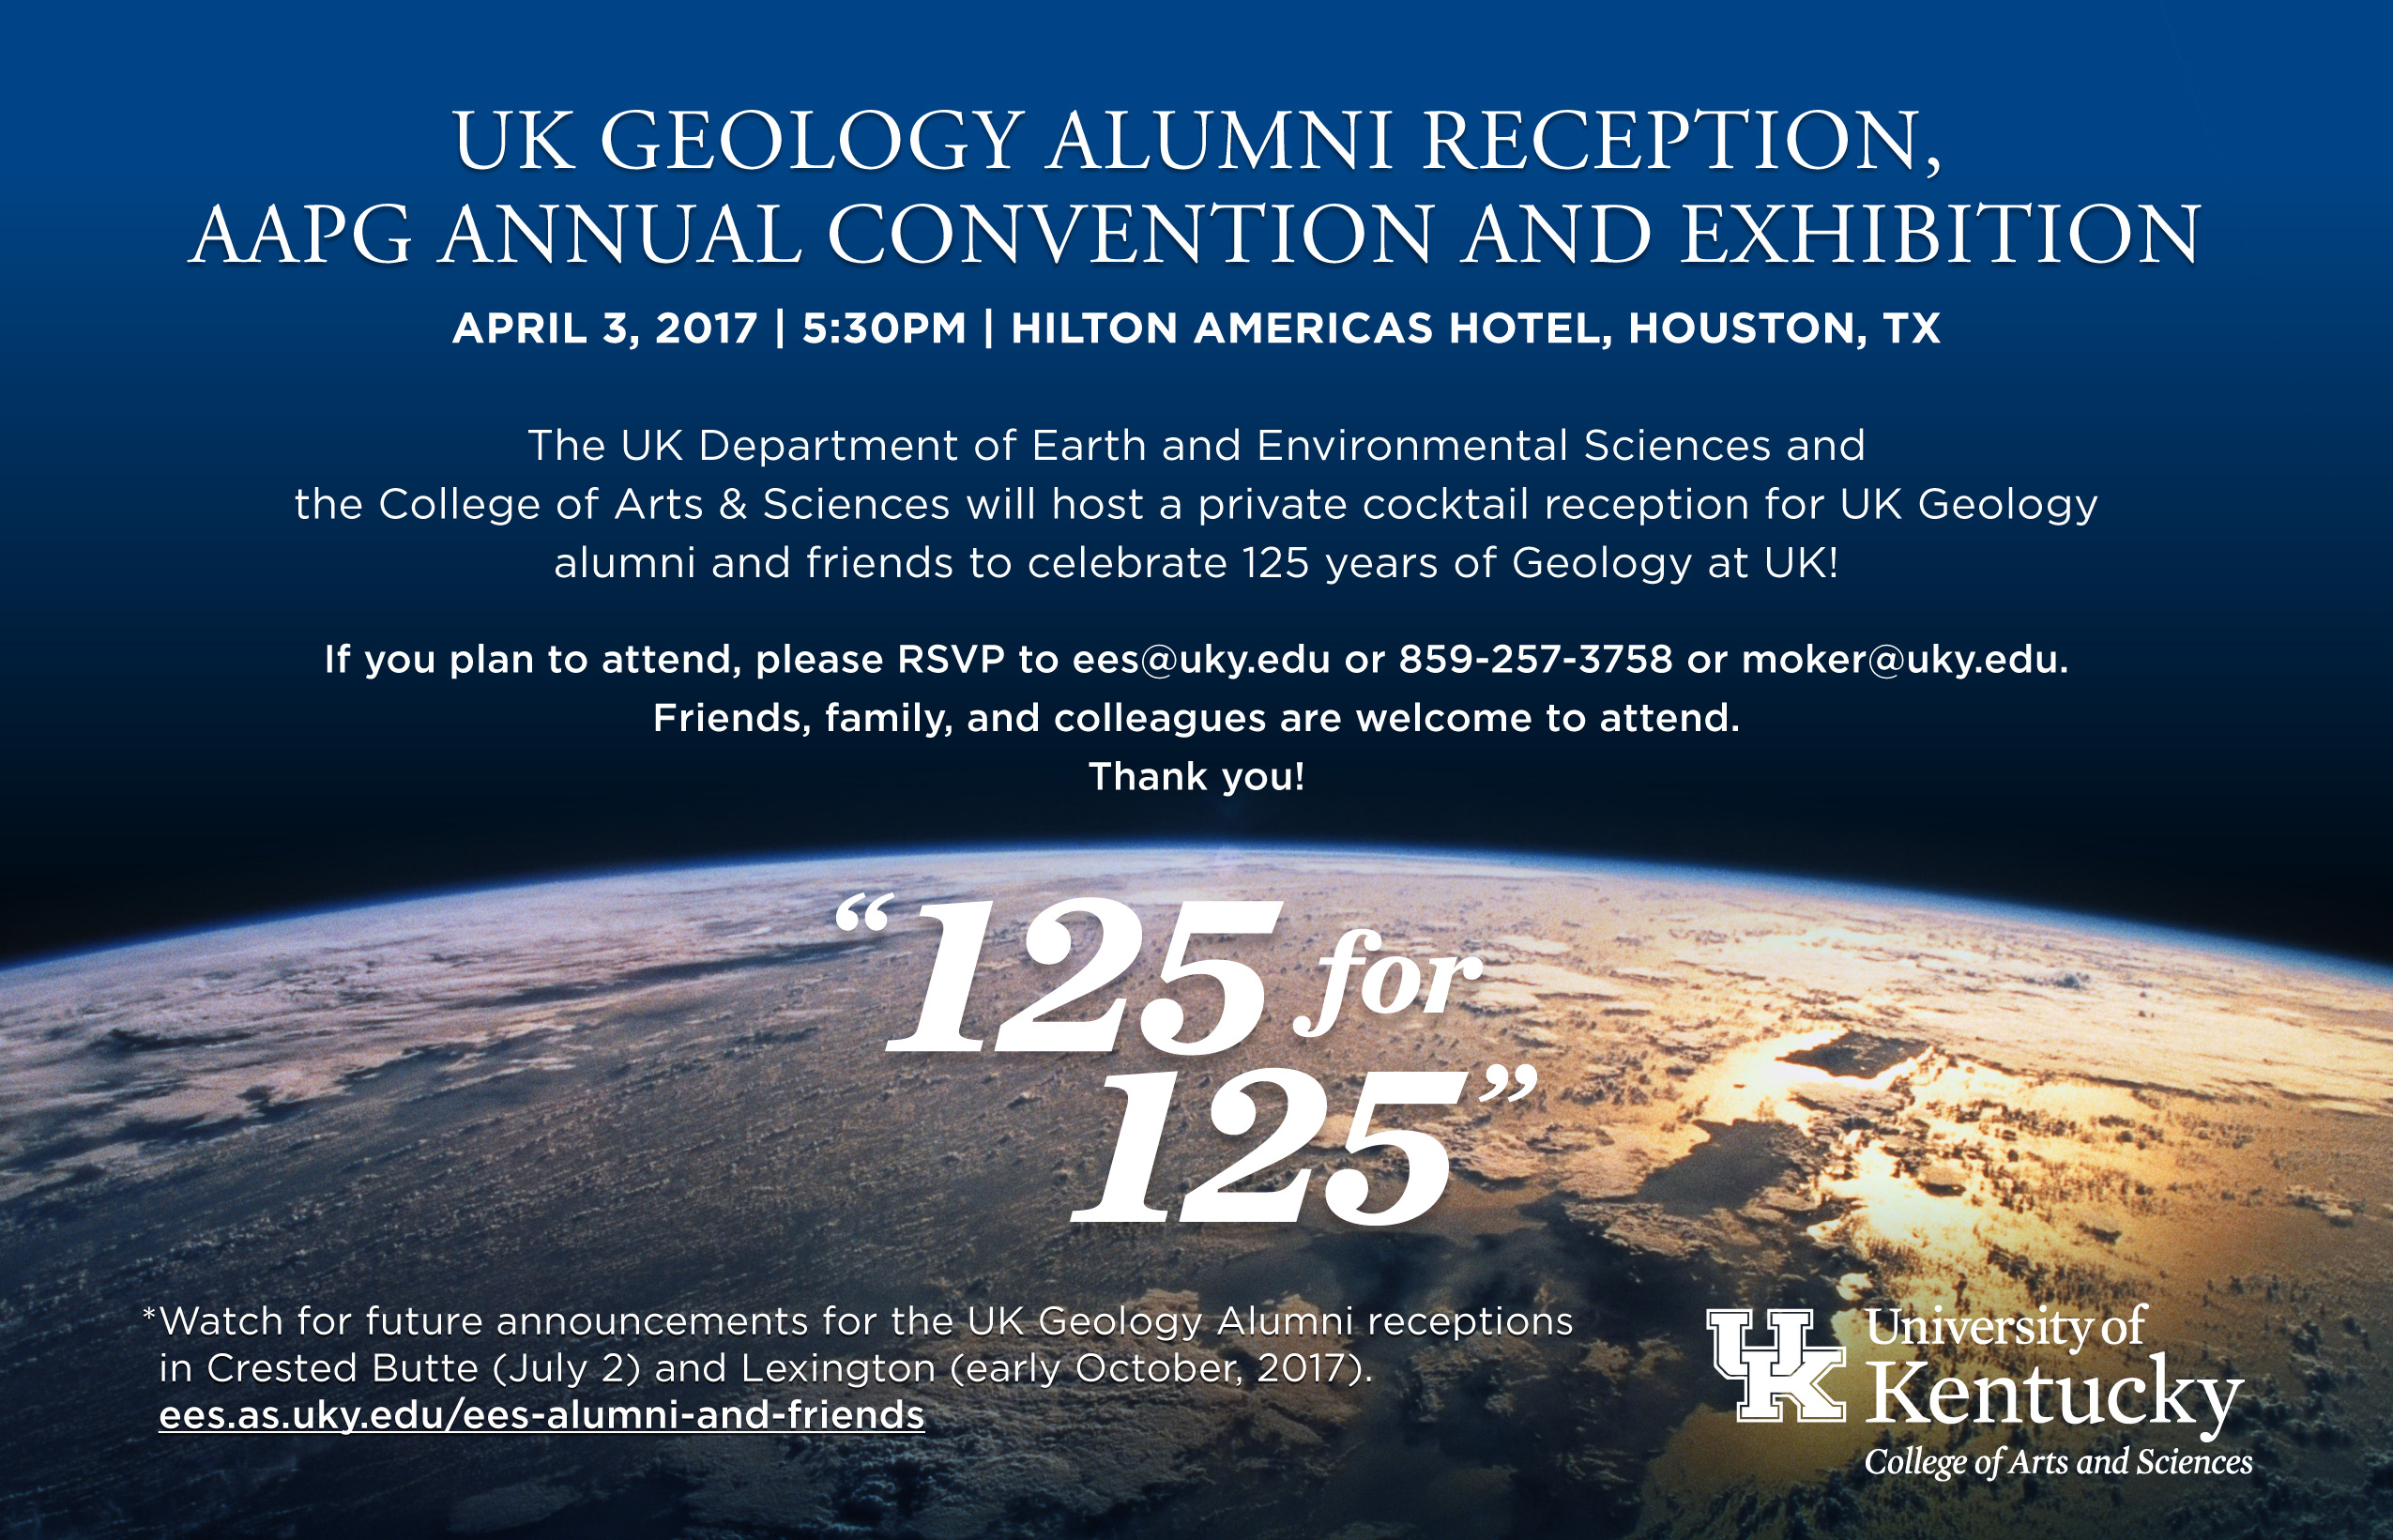 AAPG Annual Convention Reception University of Kentucky College of